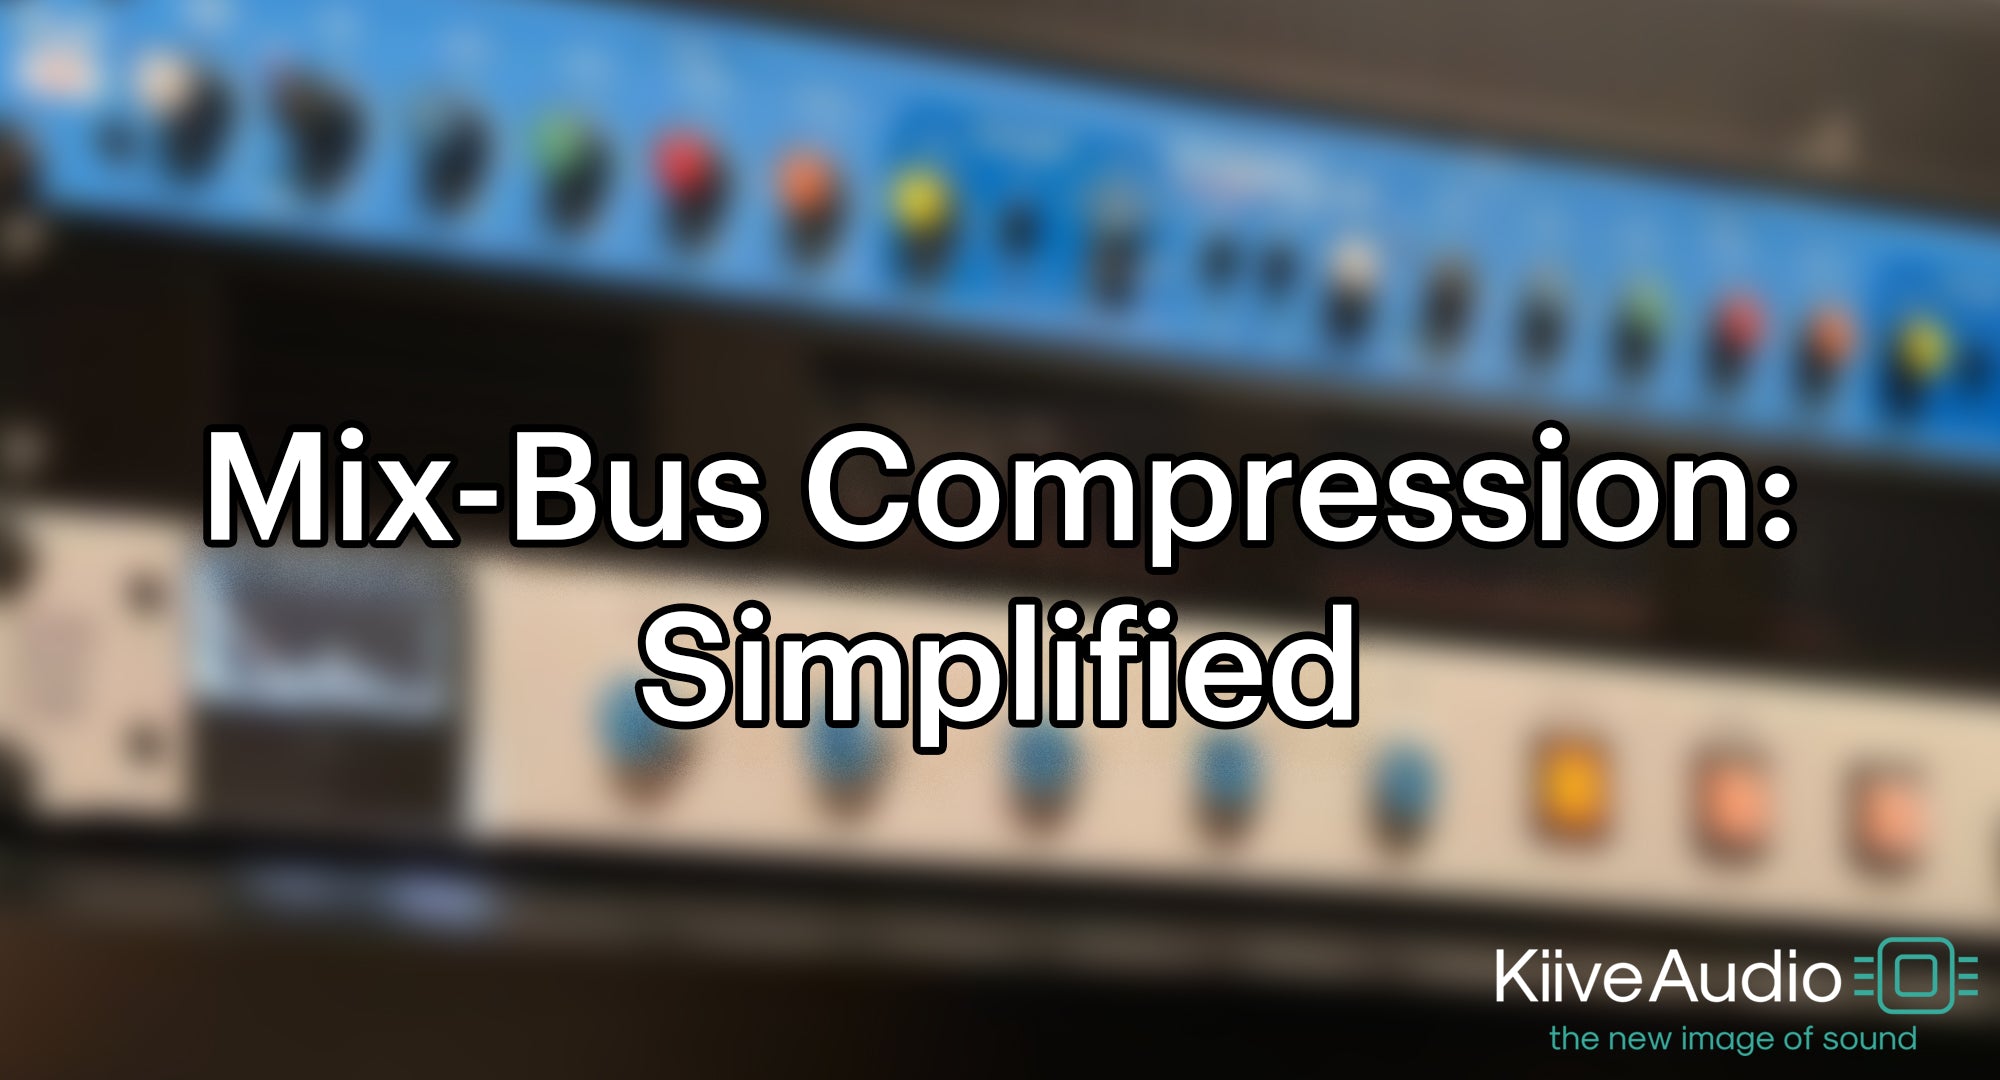 Mix-Bus Compression: Simplified